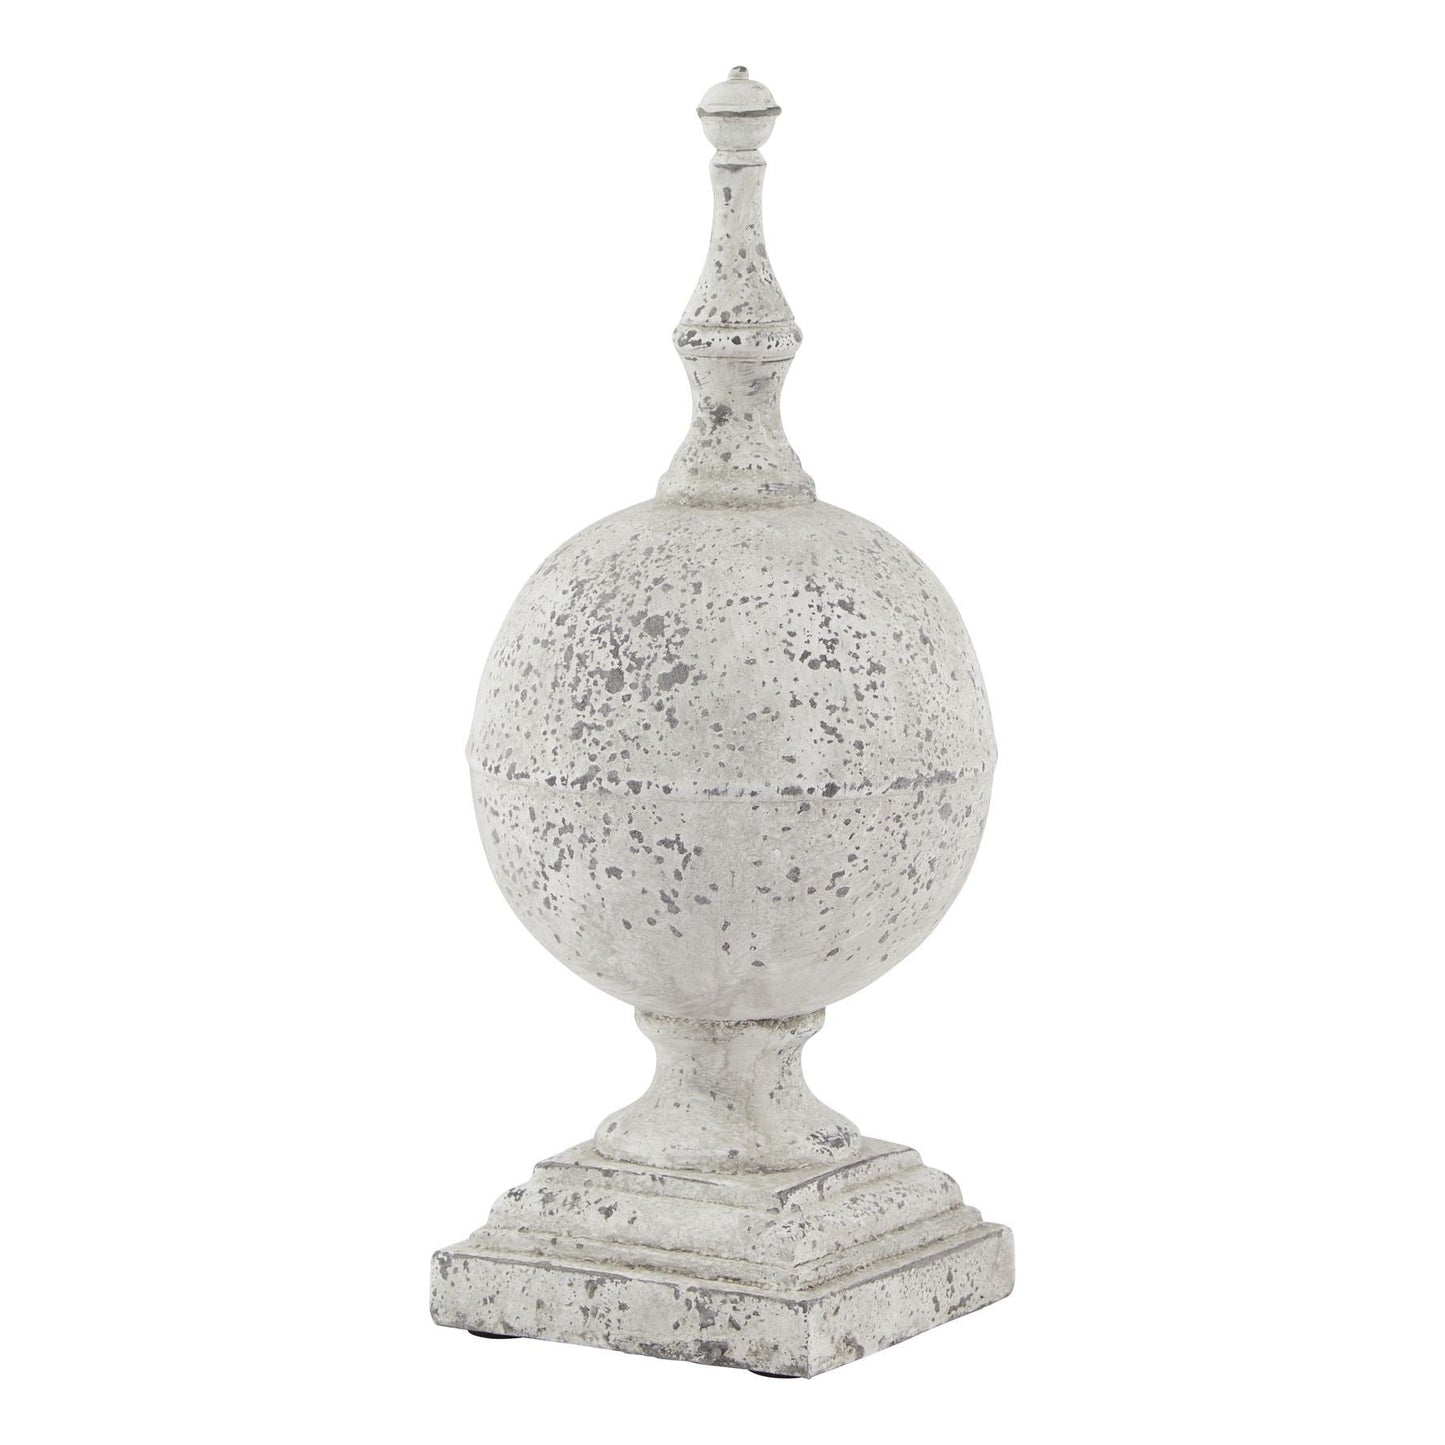 Aged Stone Effect Orb Ornament - Ashton and Finch